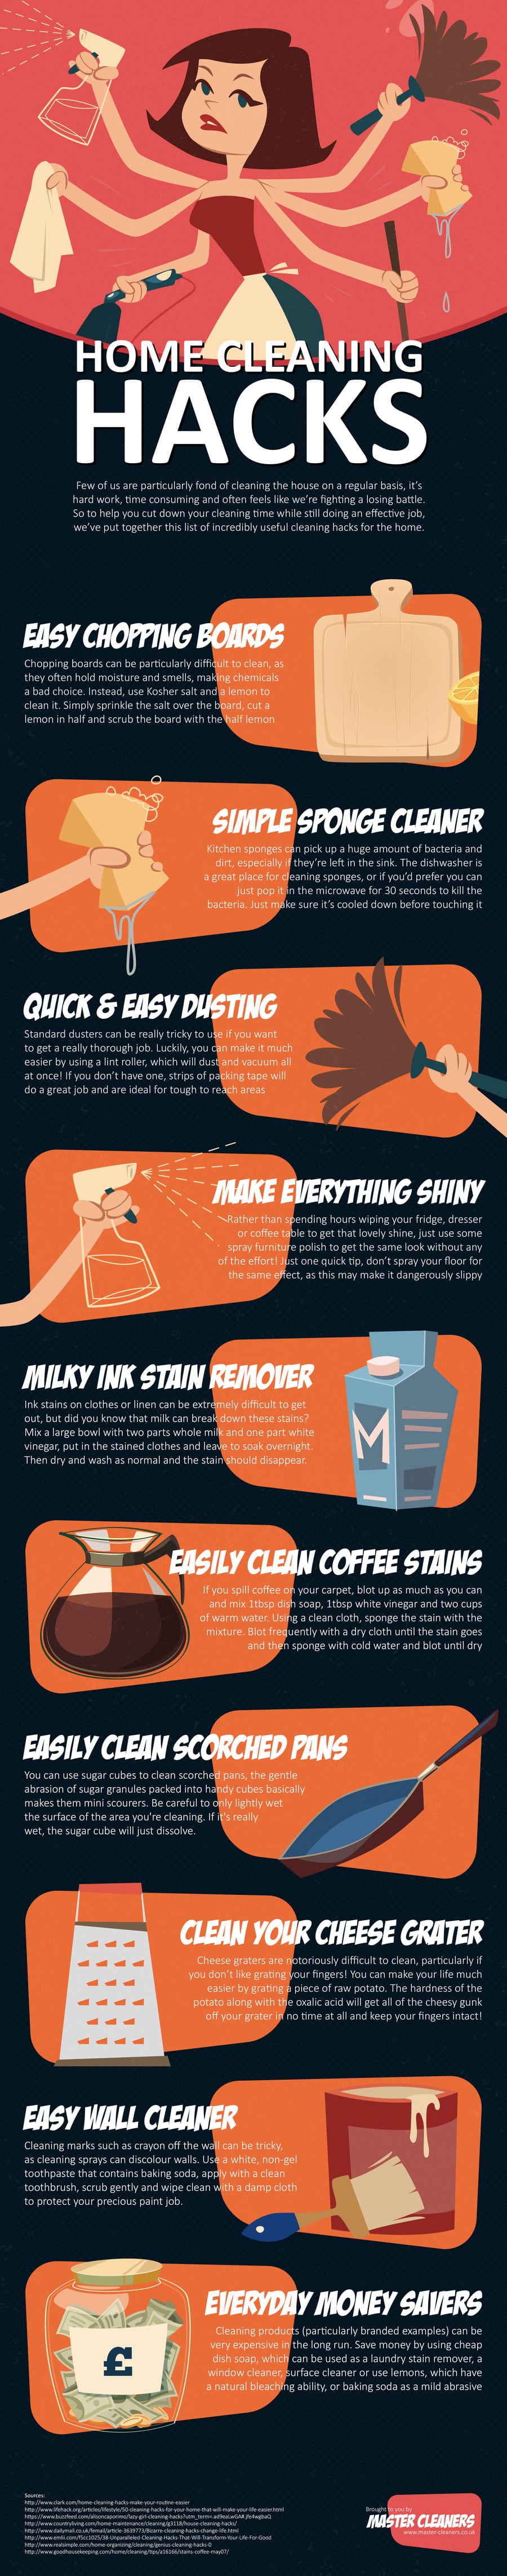 10 Home Cleaning Hacks from Master Cleaners in London